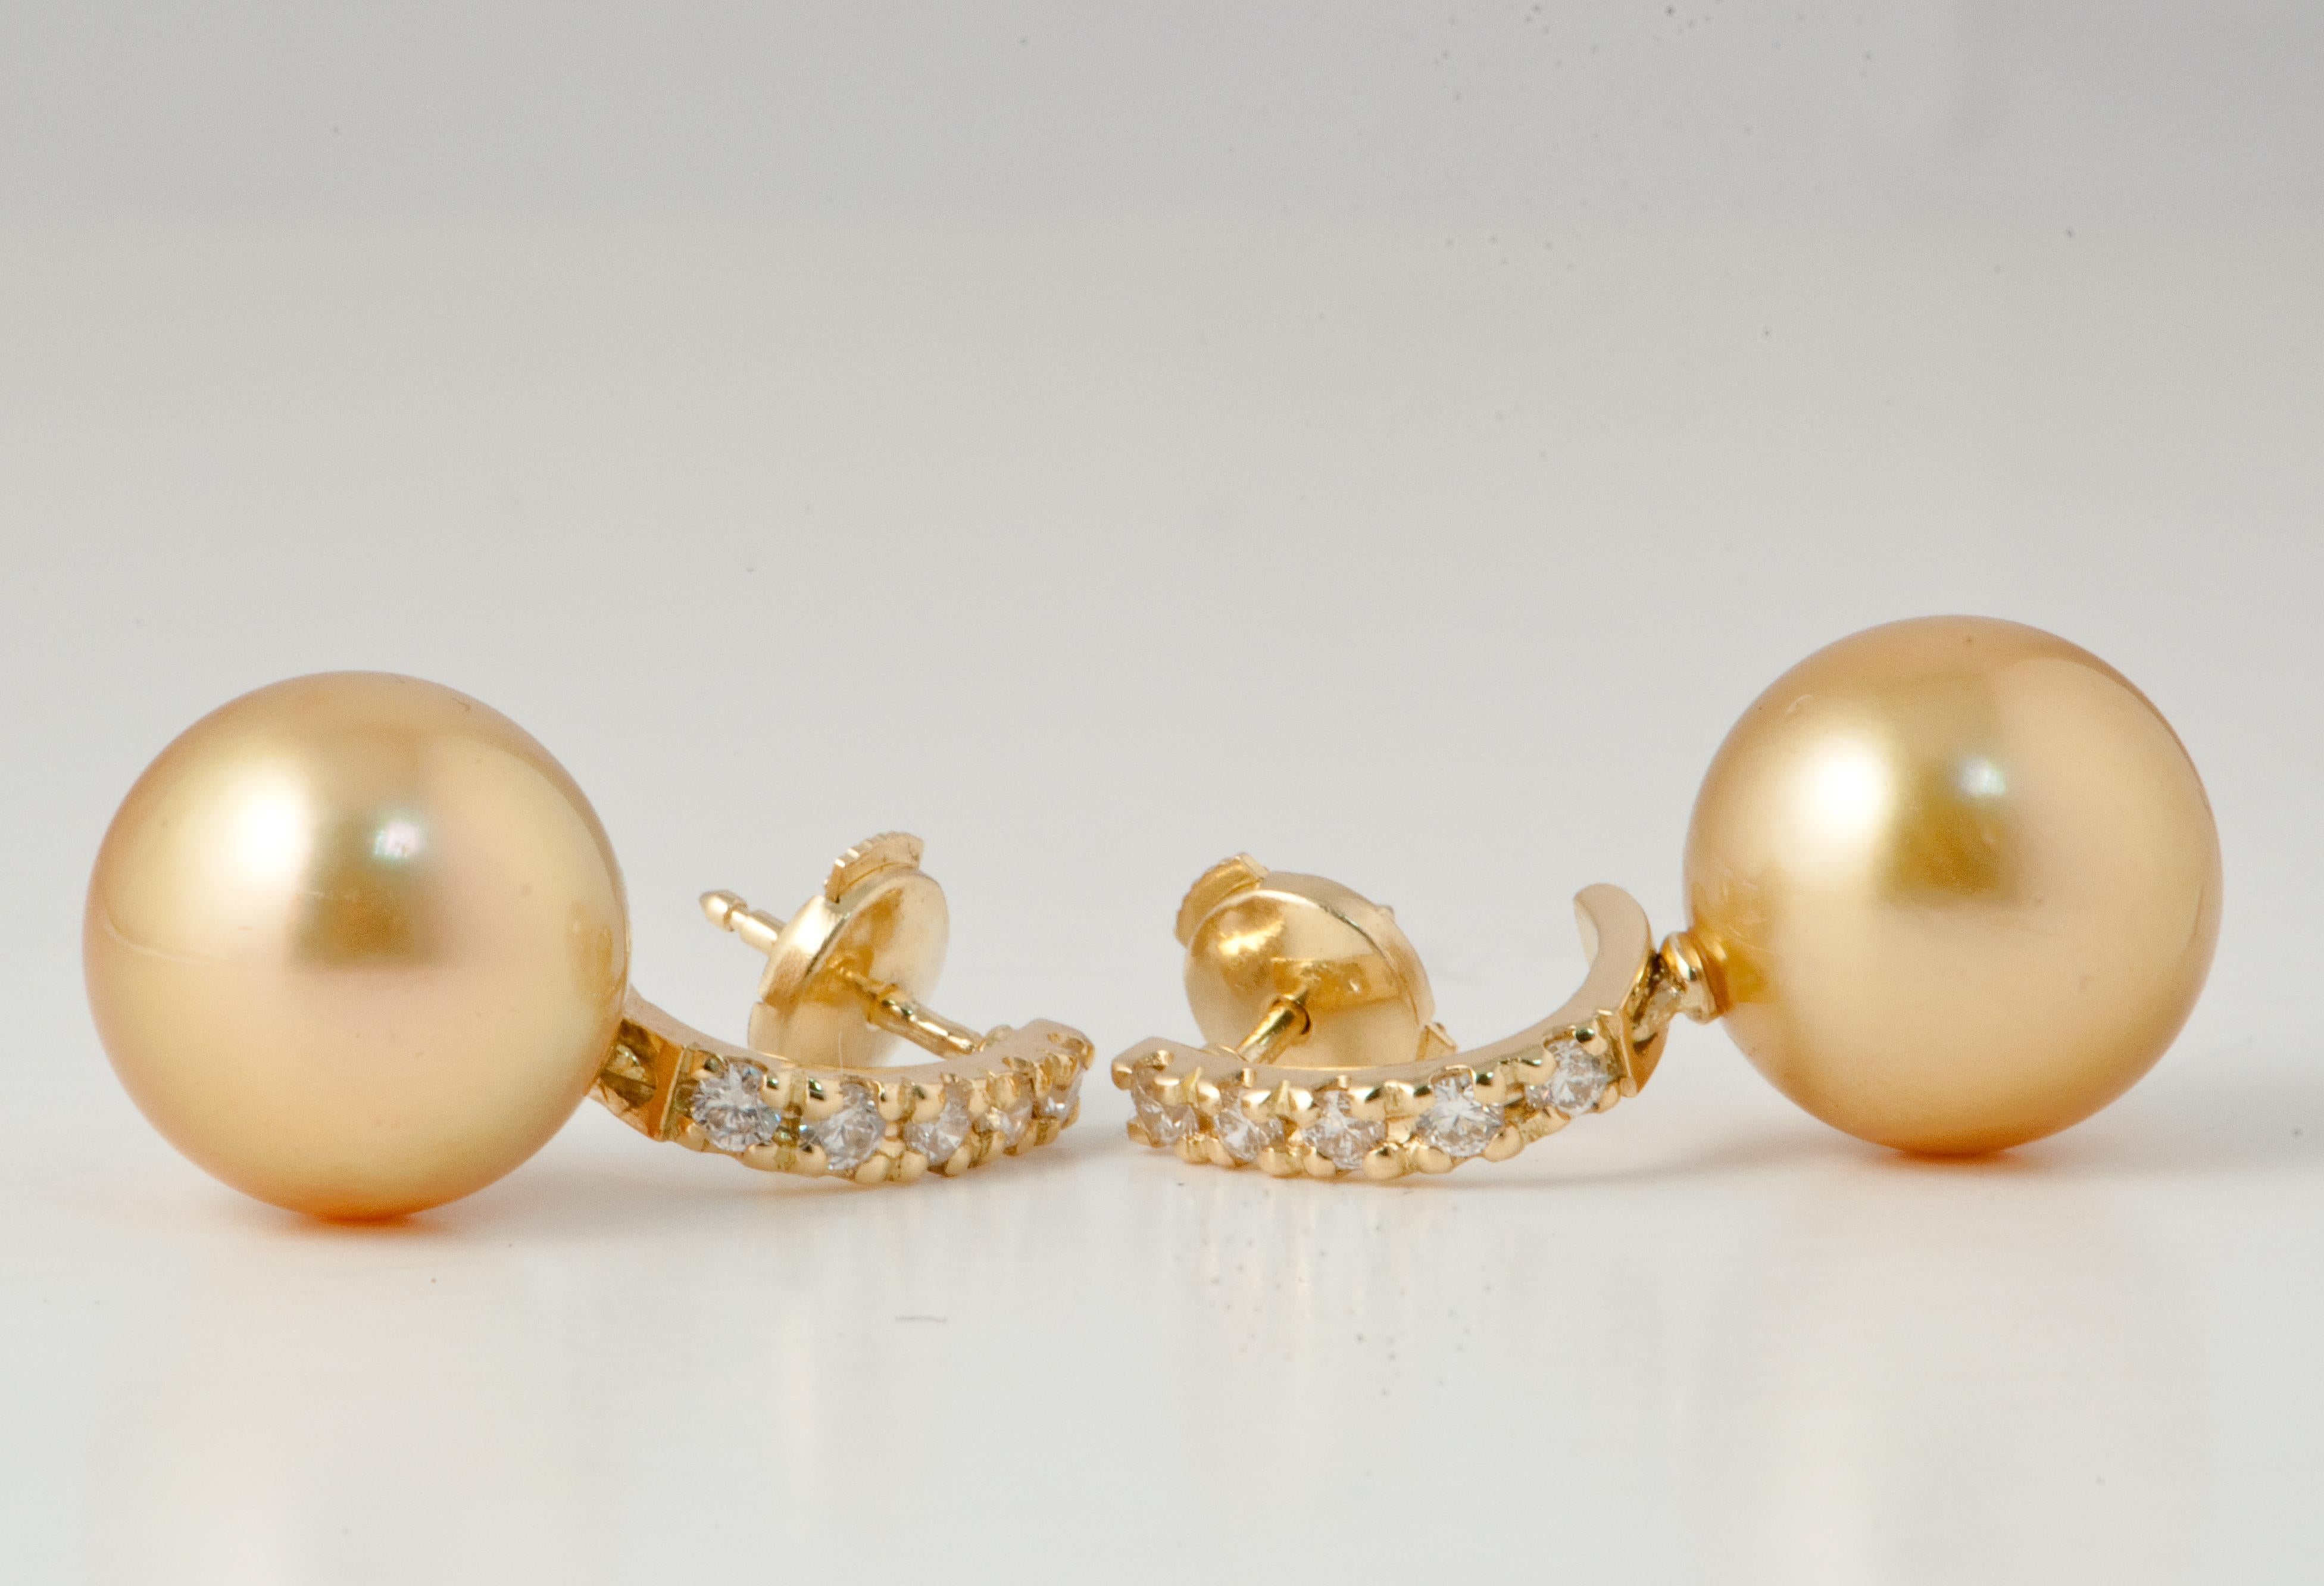 These earrings are made of 18k yellow gold, a precious material that adds a touch of elegance and sophistication to your look.

The real eye-catcher of these earrings is the magnificent South Sea pearl, measuring between 12 and 12.5 mm. South Sea